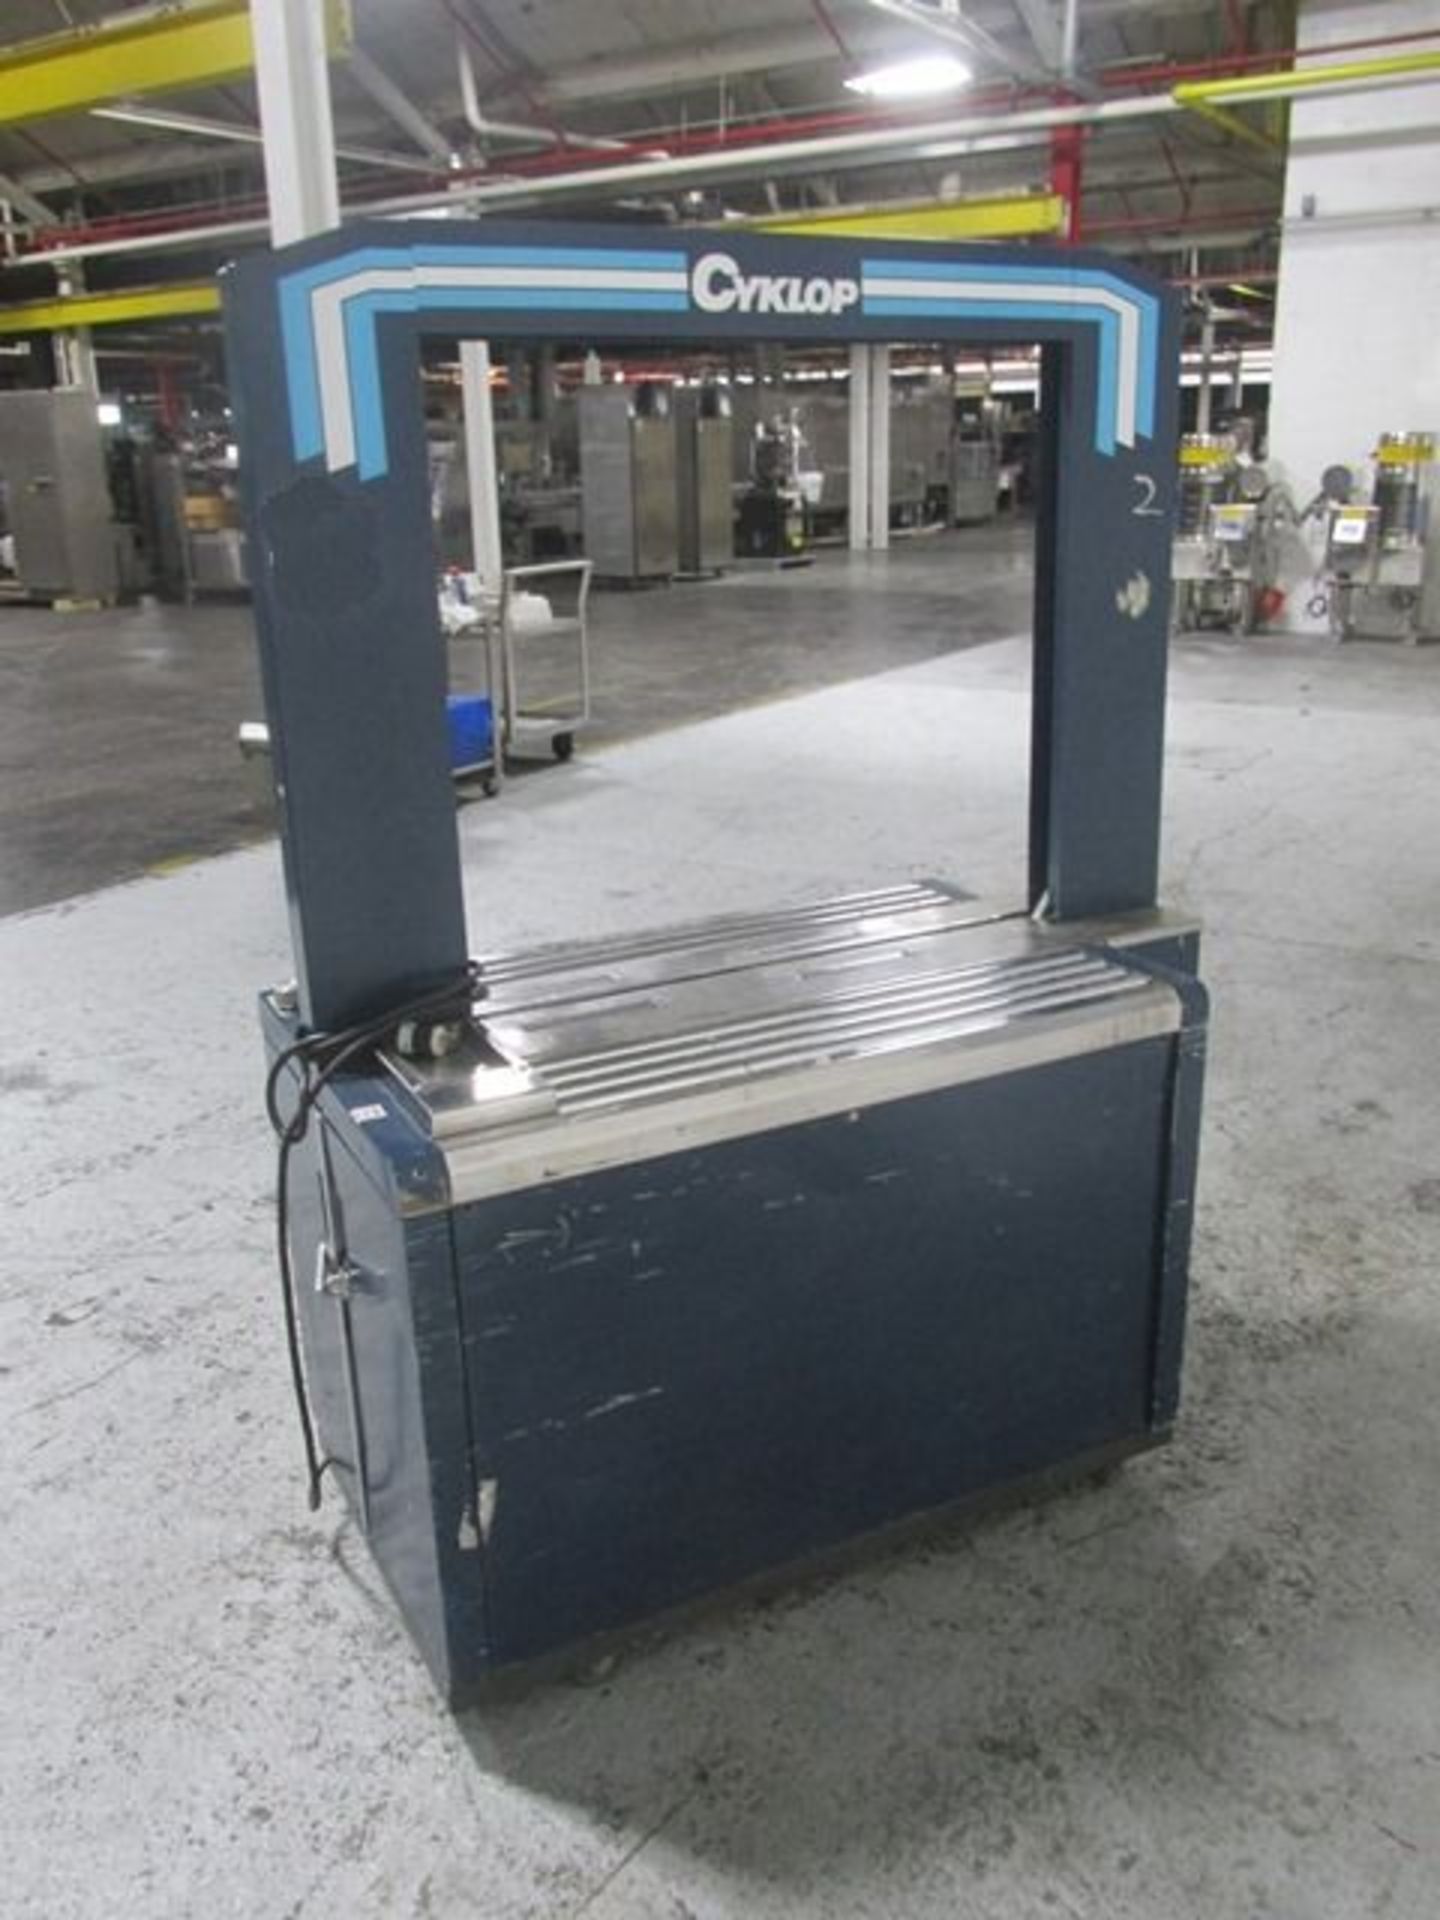 Cyklop Automatic Strapping Machine, Model ASM-1 - Image 2 of 6